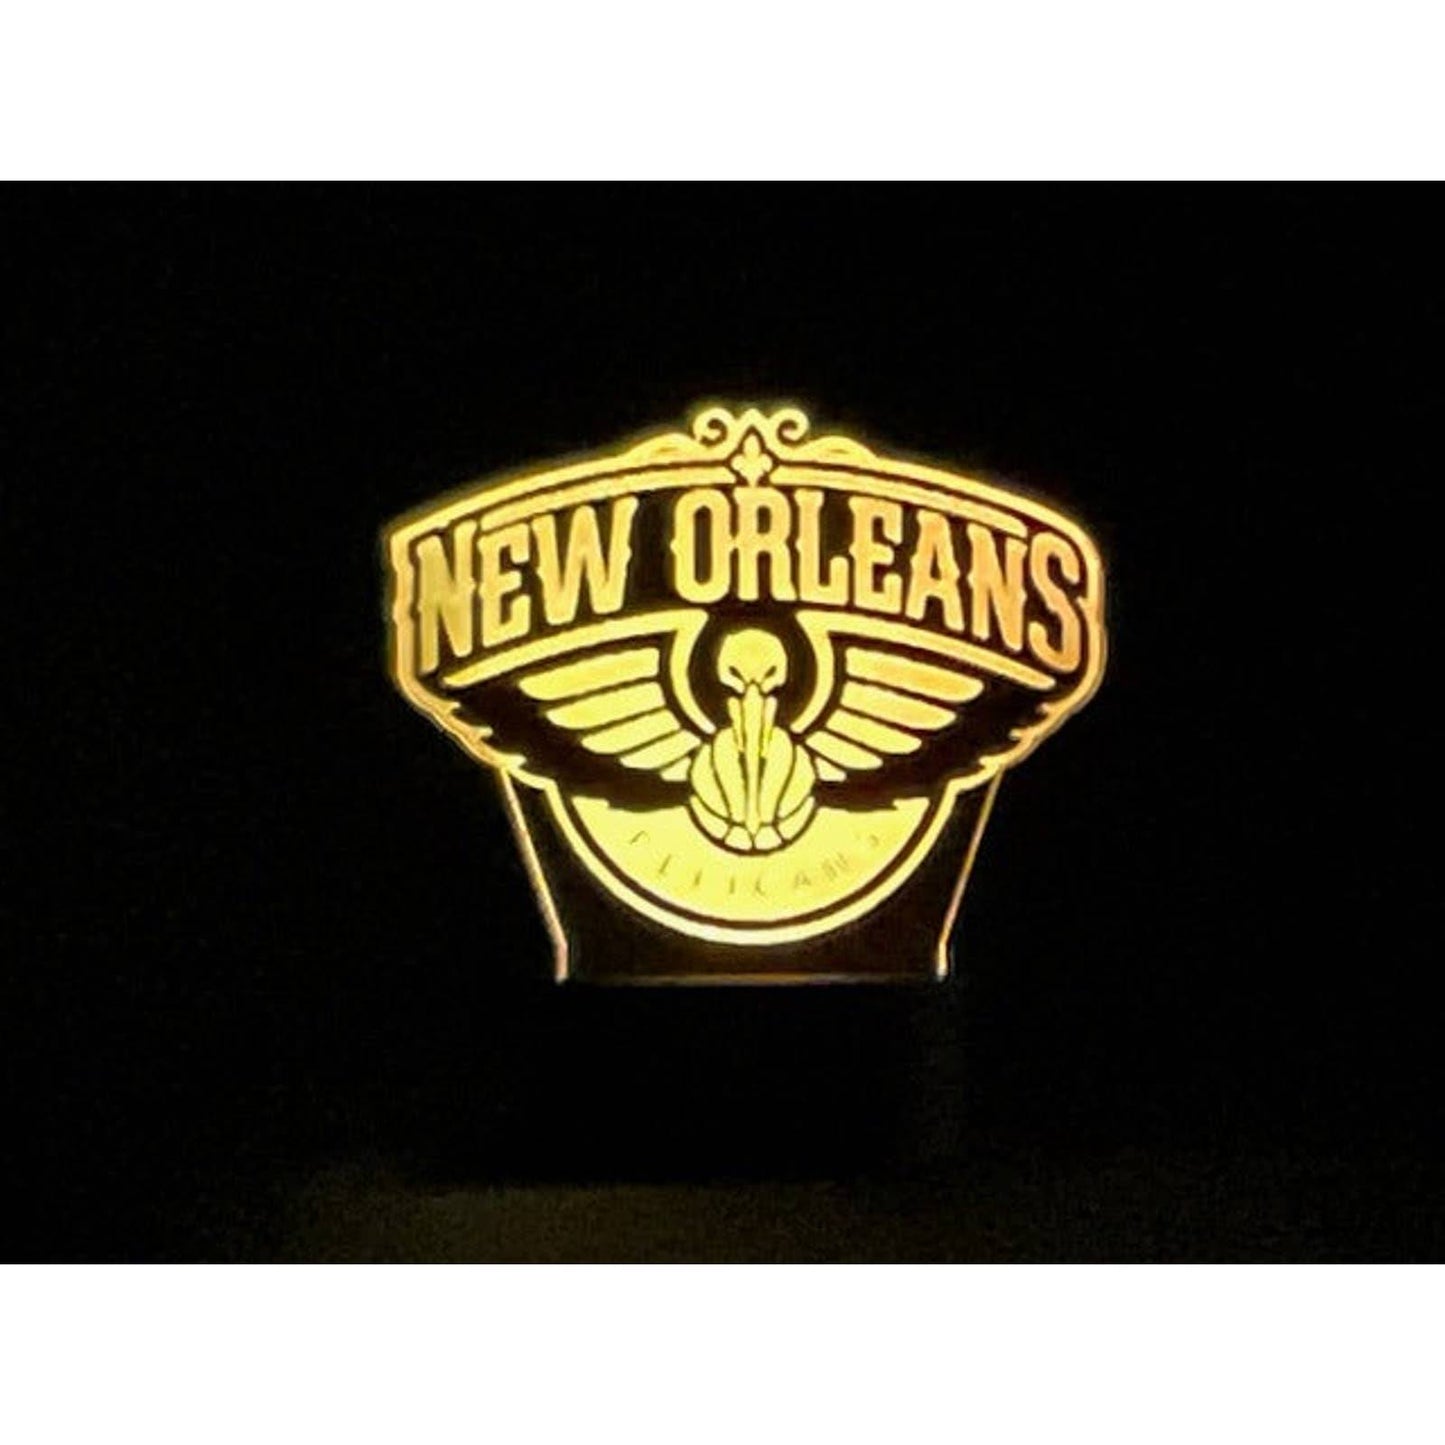 New Orleans Pelicans 3D LED Night-Light 7 Color Changing Lamp w/ Touch Switch